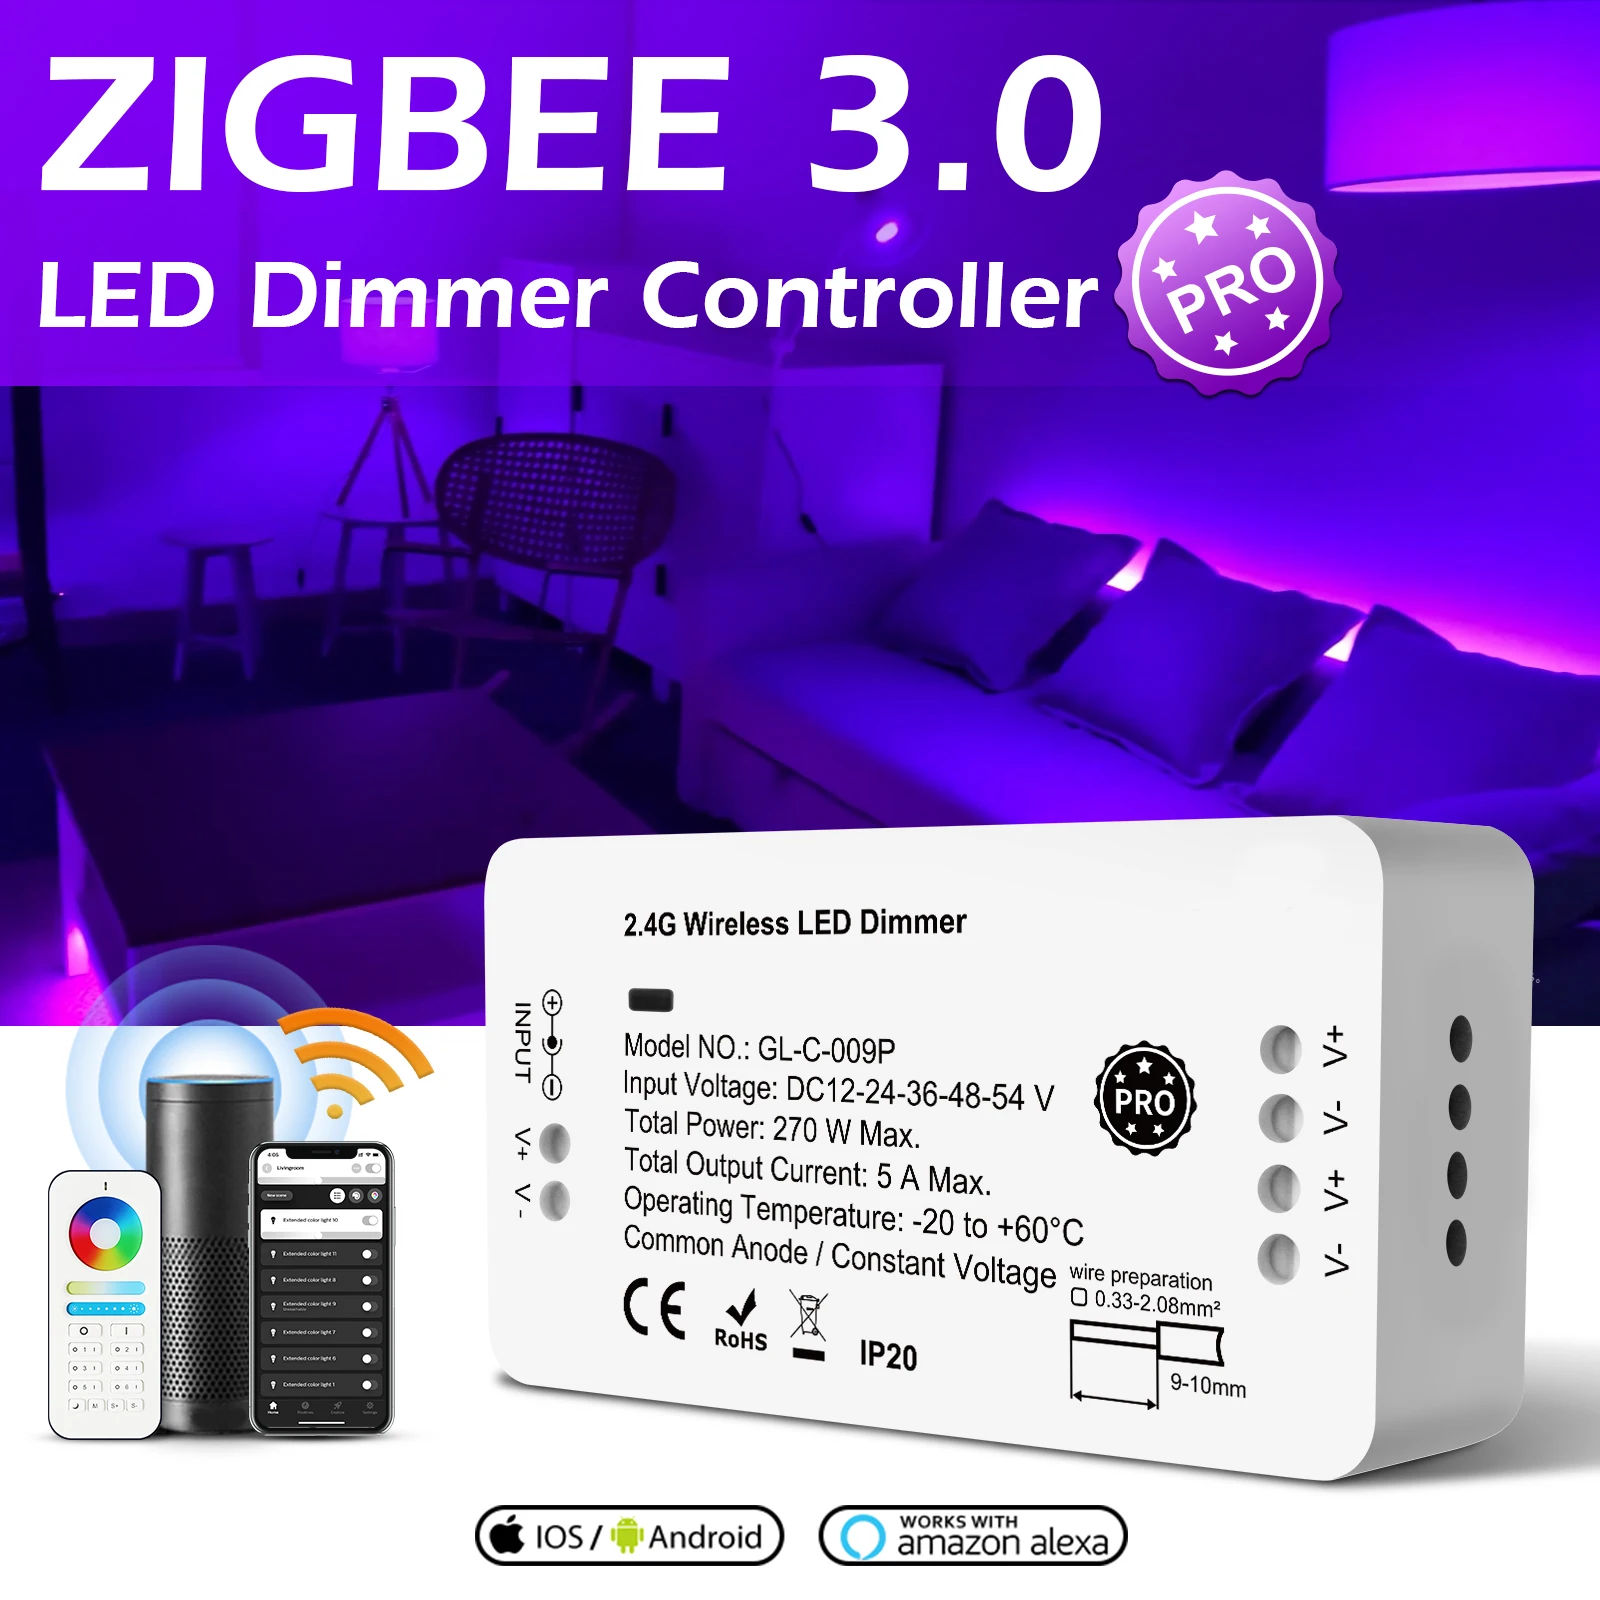 Zigbee 3.0 DC12-24V Smart Pro Dimmer LED ZigBee Strip Controller work with RF Remote, for LED Strip gledopto rgbcct zigbee wifi led strip controller tuya app dimmer work with smart life app wifi alexa amazon voice control